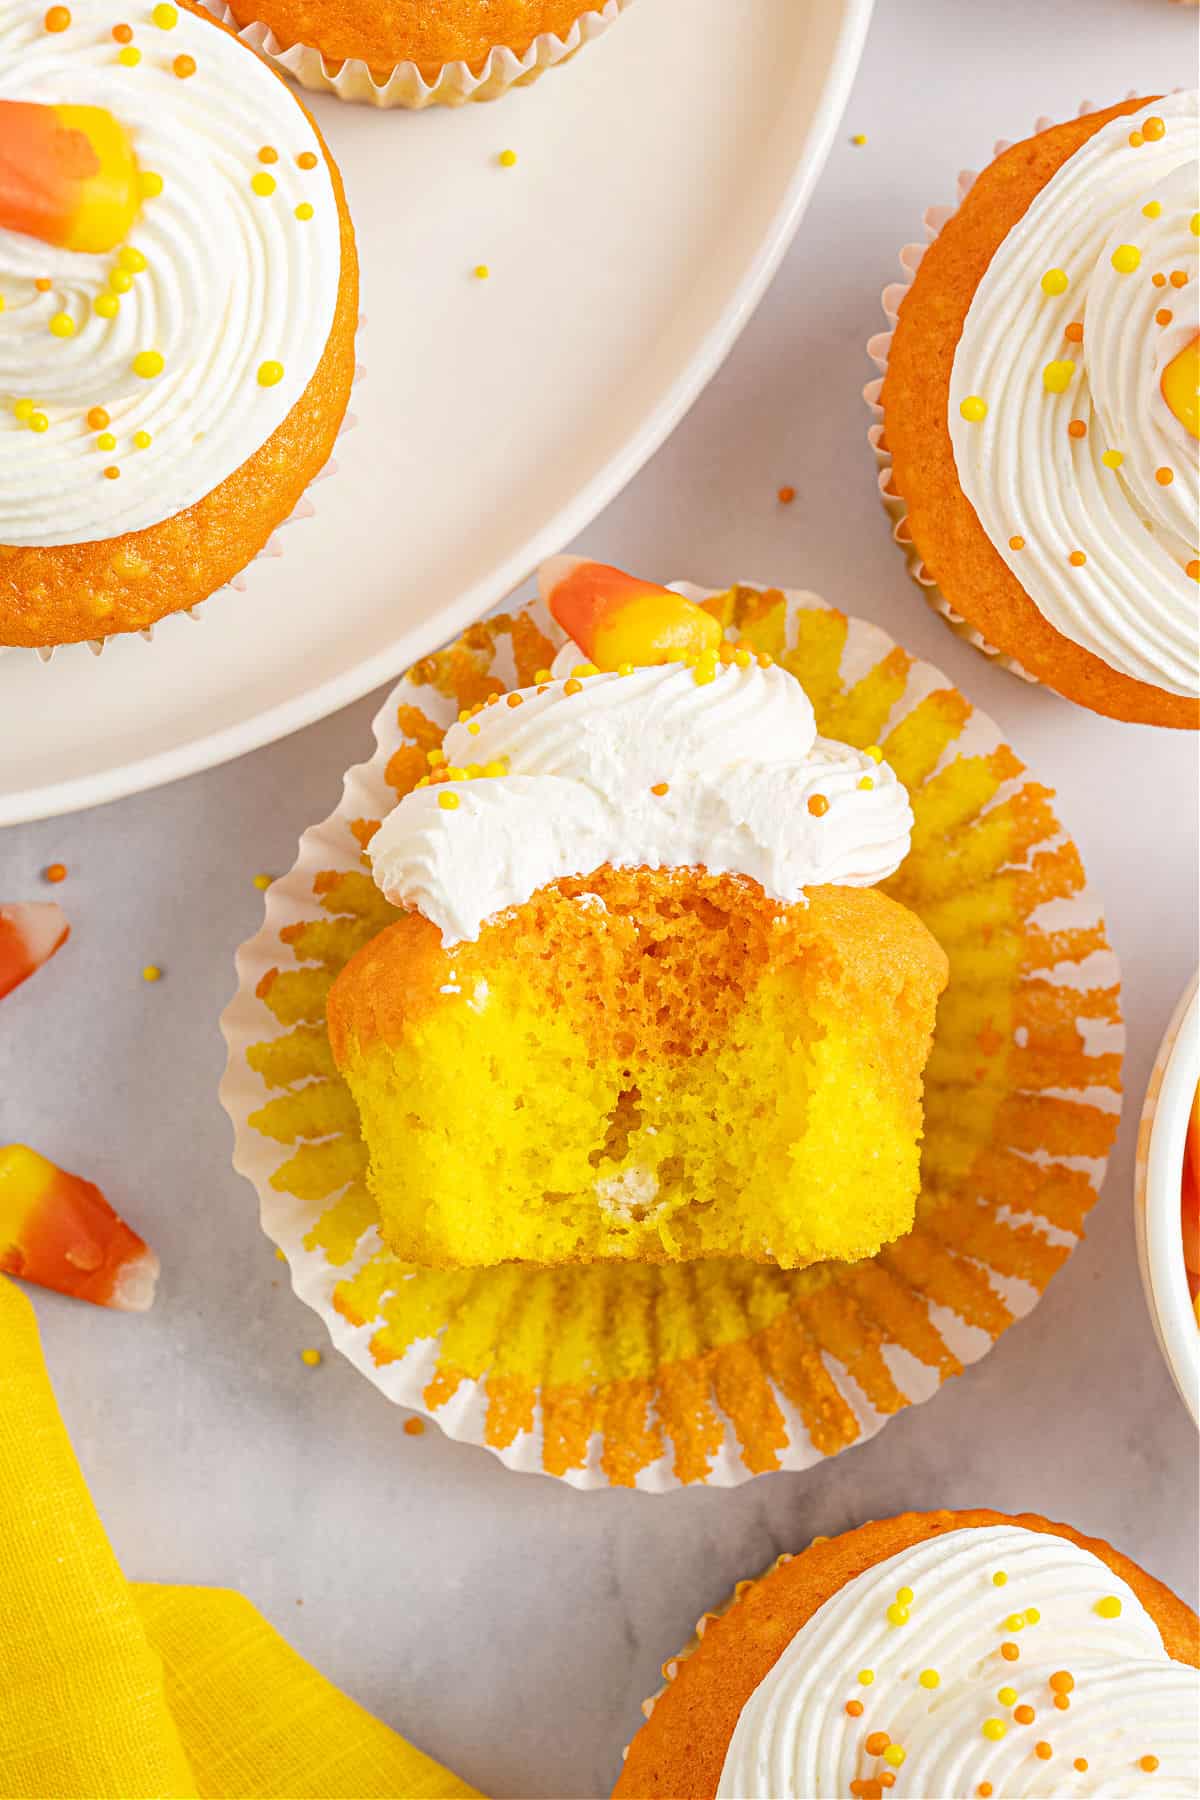 Yellow and orange cupcake with a bite taken out.